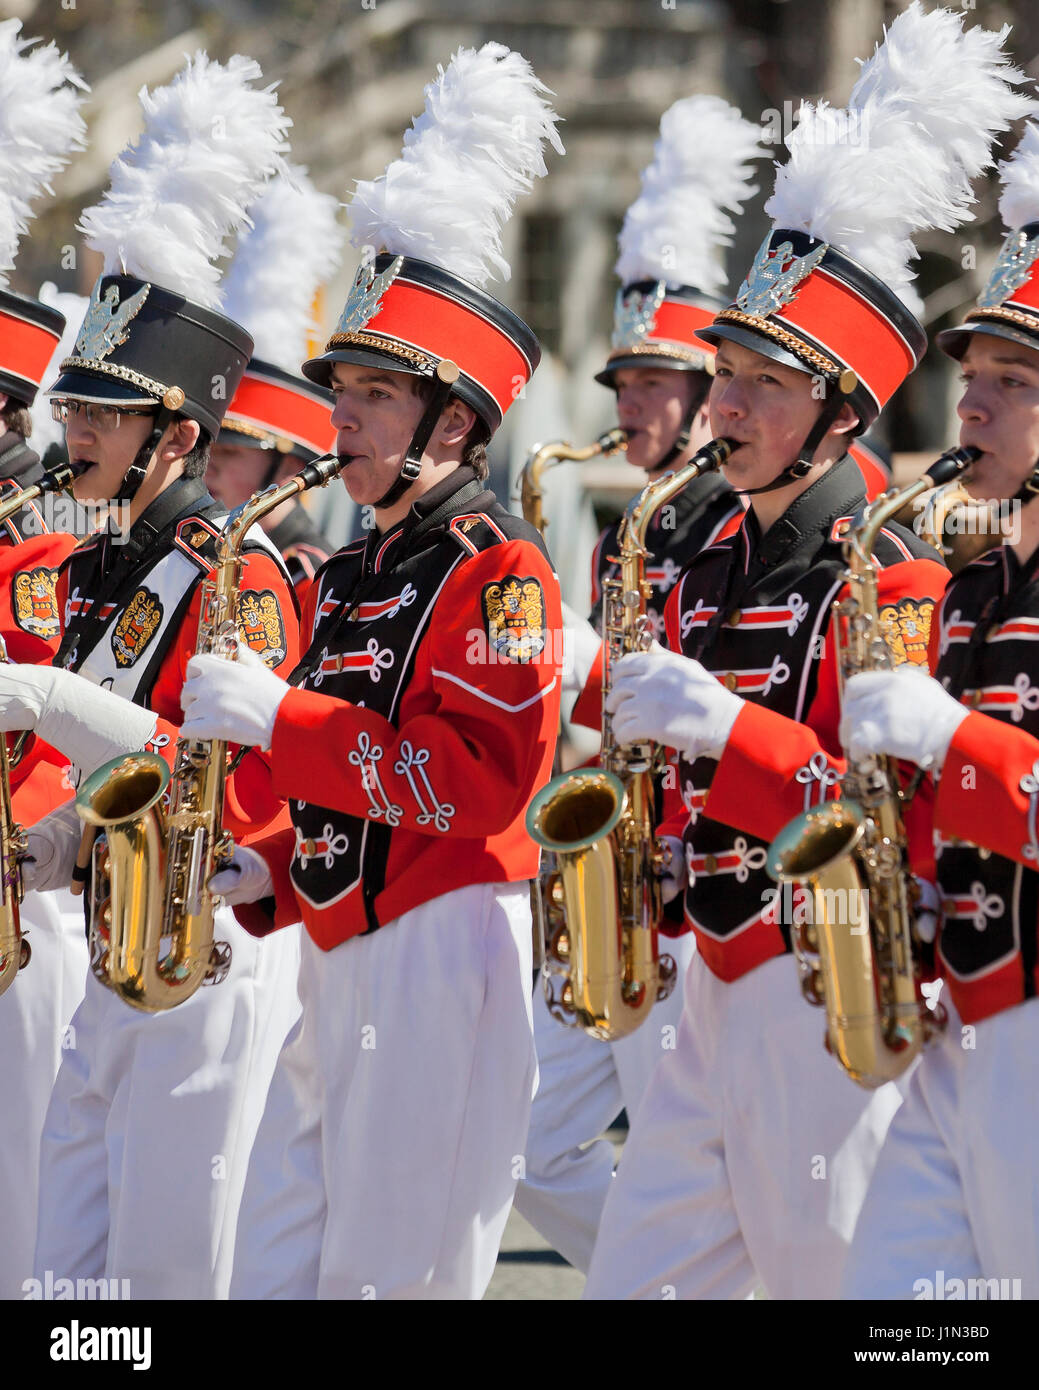 High school marching band saxophone section (sax players) - USA Stock Photo